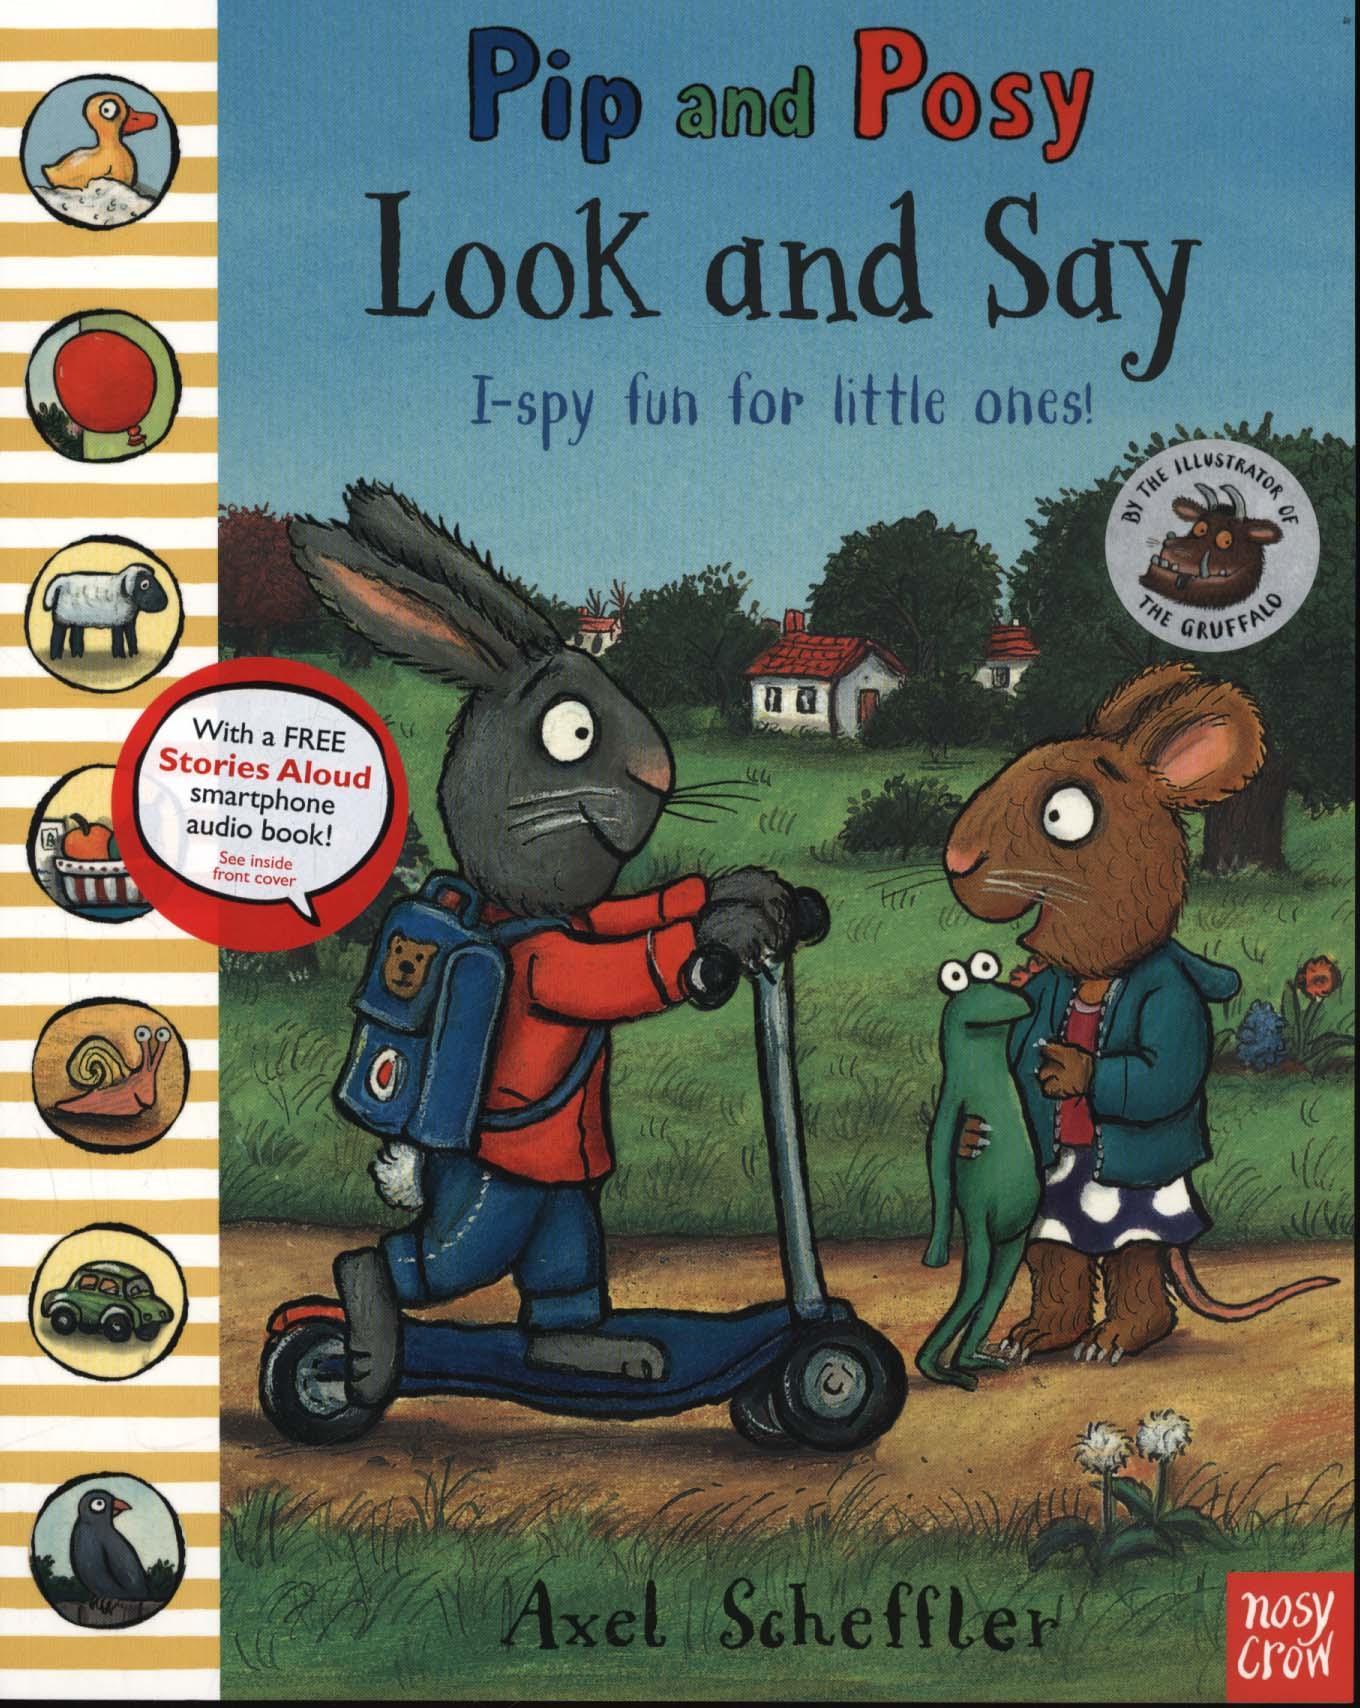 Pip and Posy: Look and Say